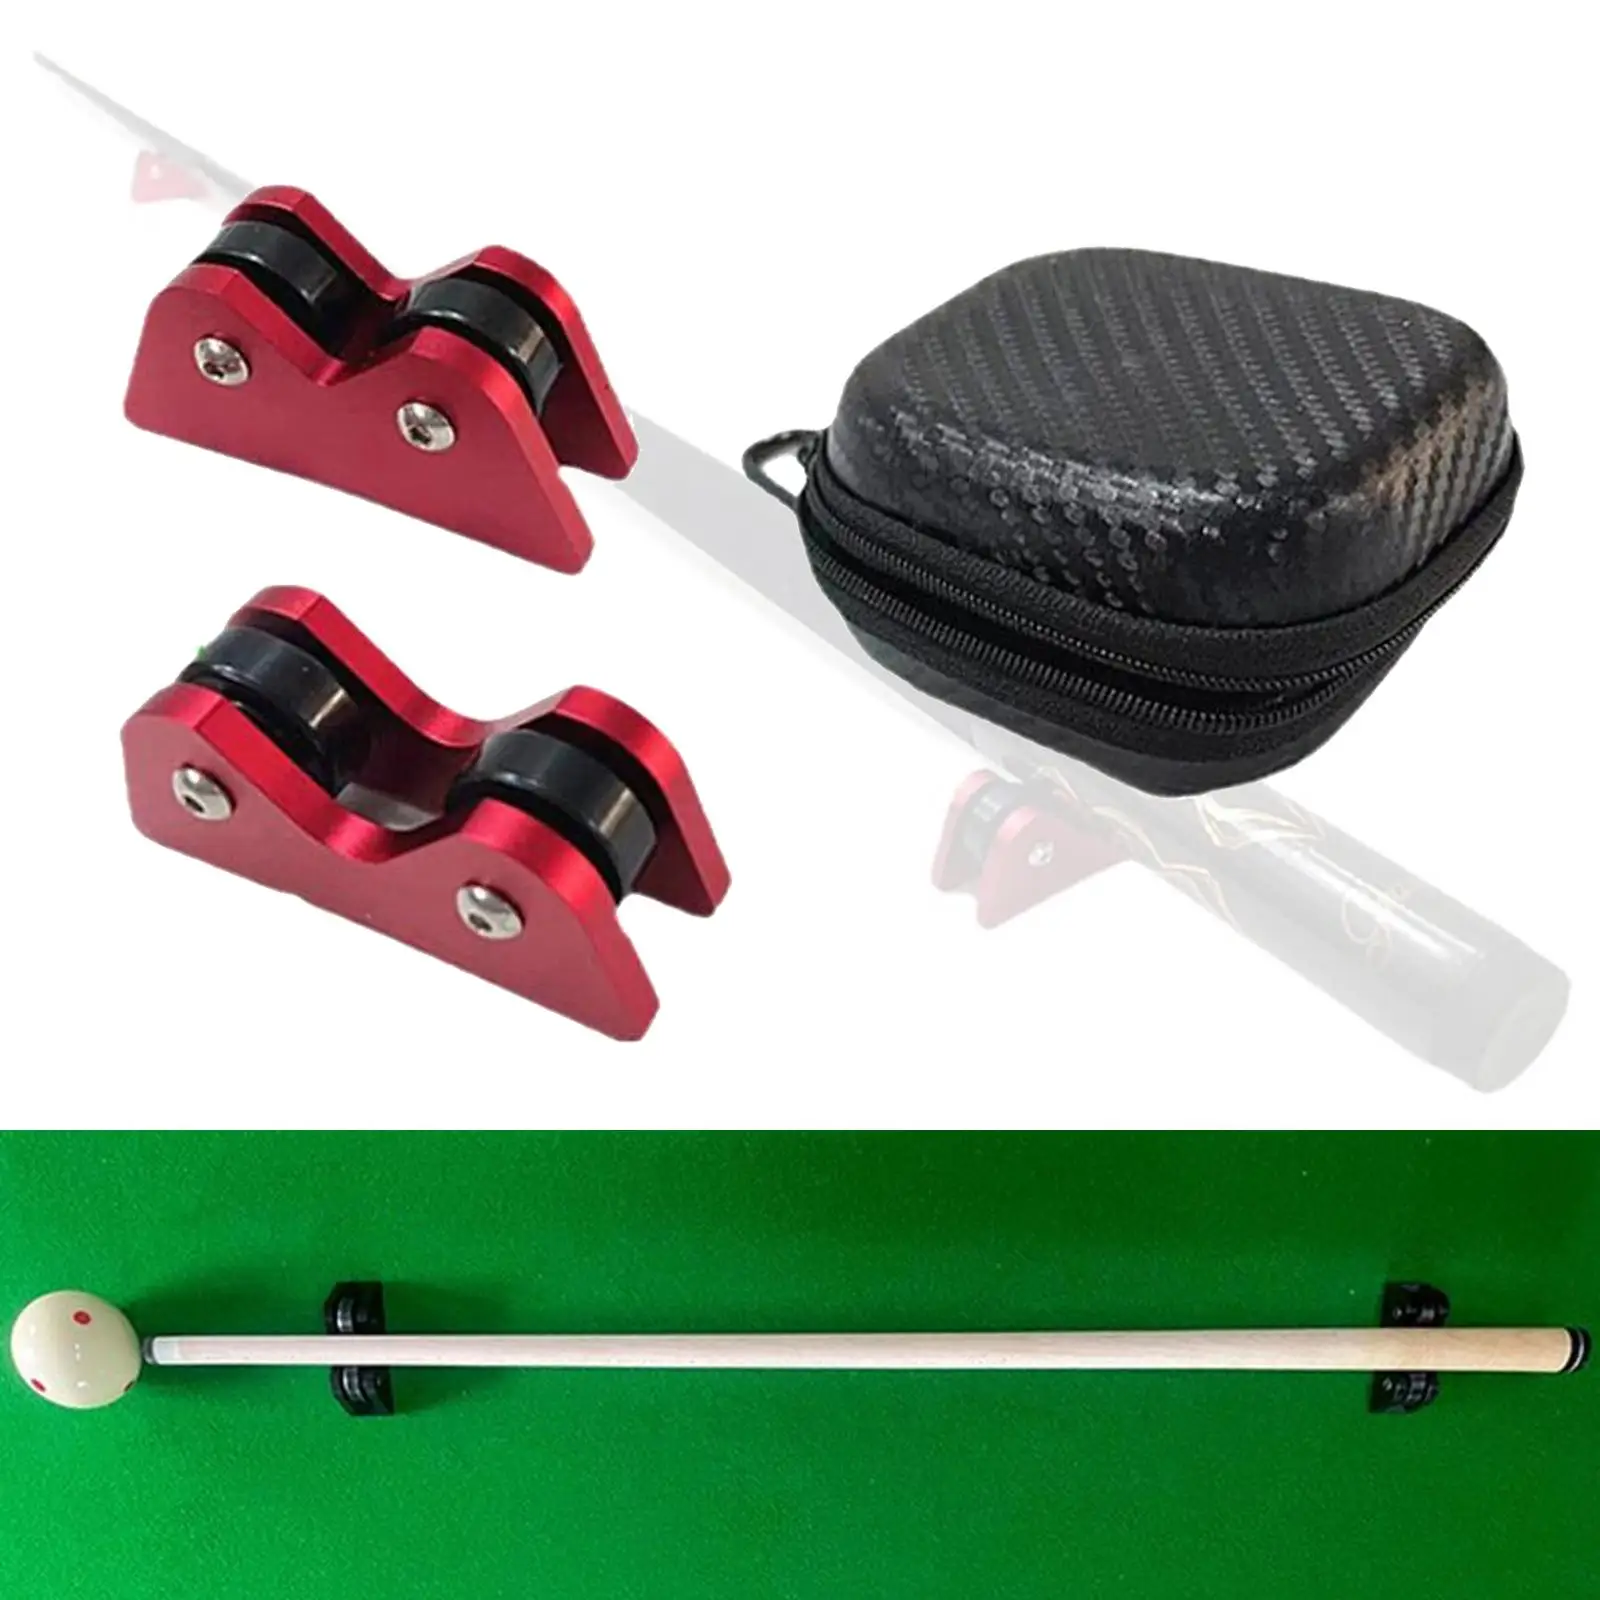 2 Pieces Billiard Cue Straightness Checker with Carry Case Detection Durable Portable Tool for Club Bar Home Maintenance Repair